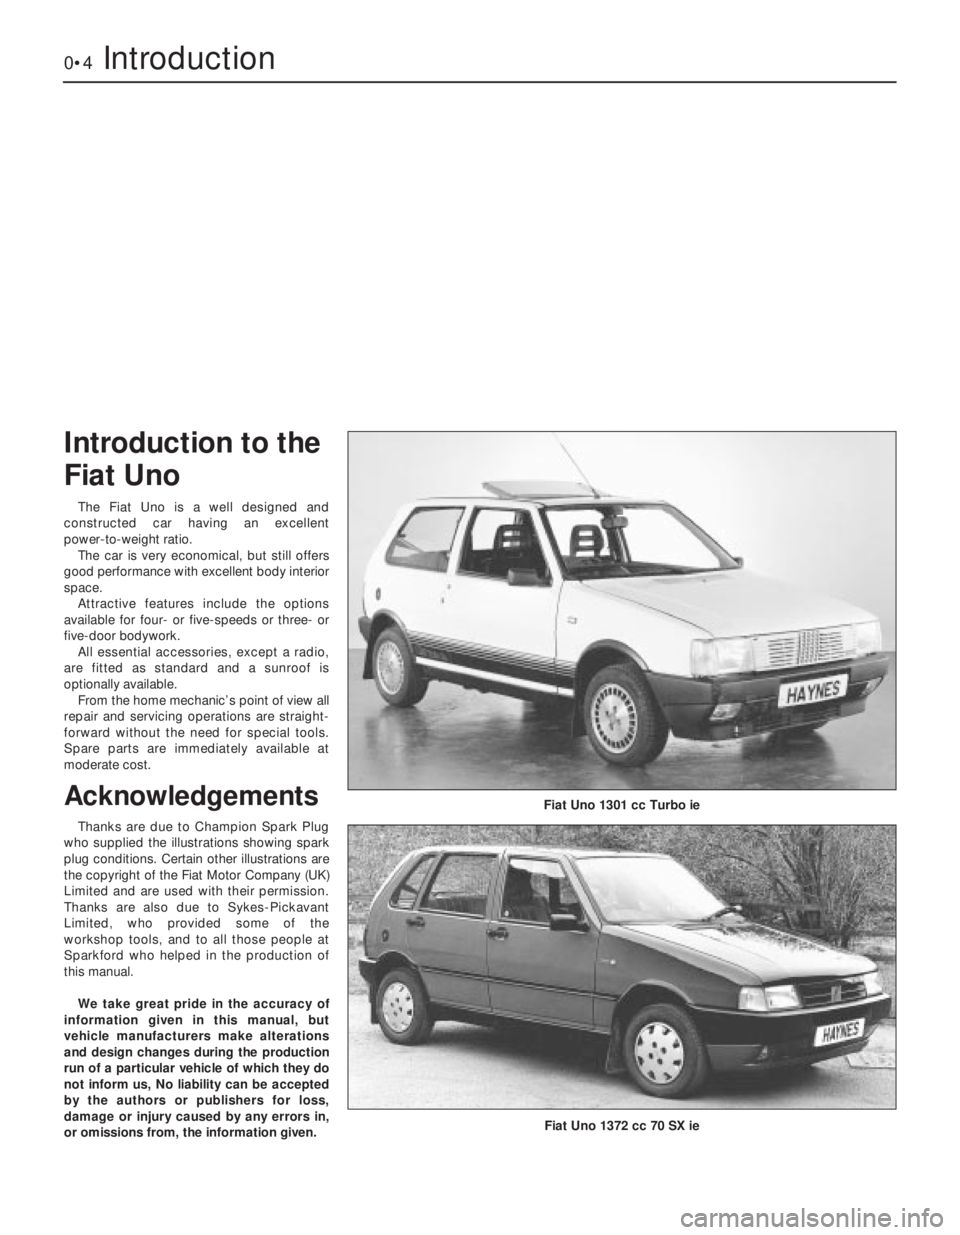 FIAT UNO 1983  Service Repair Manual The Fiat Uno is a well designed and
constructed car having an excellent
power-to-weight ratio.
The car is very economical, but still offers
good performance with excellent body interior
space.
Attract